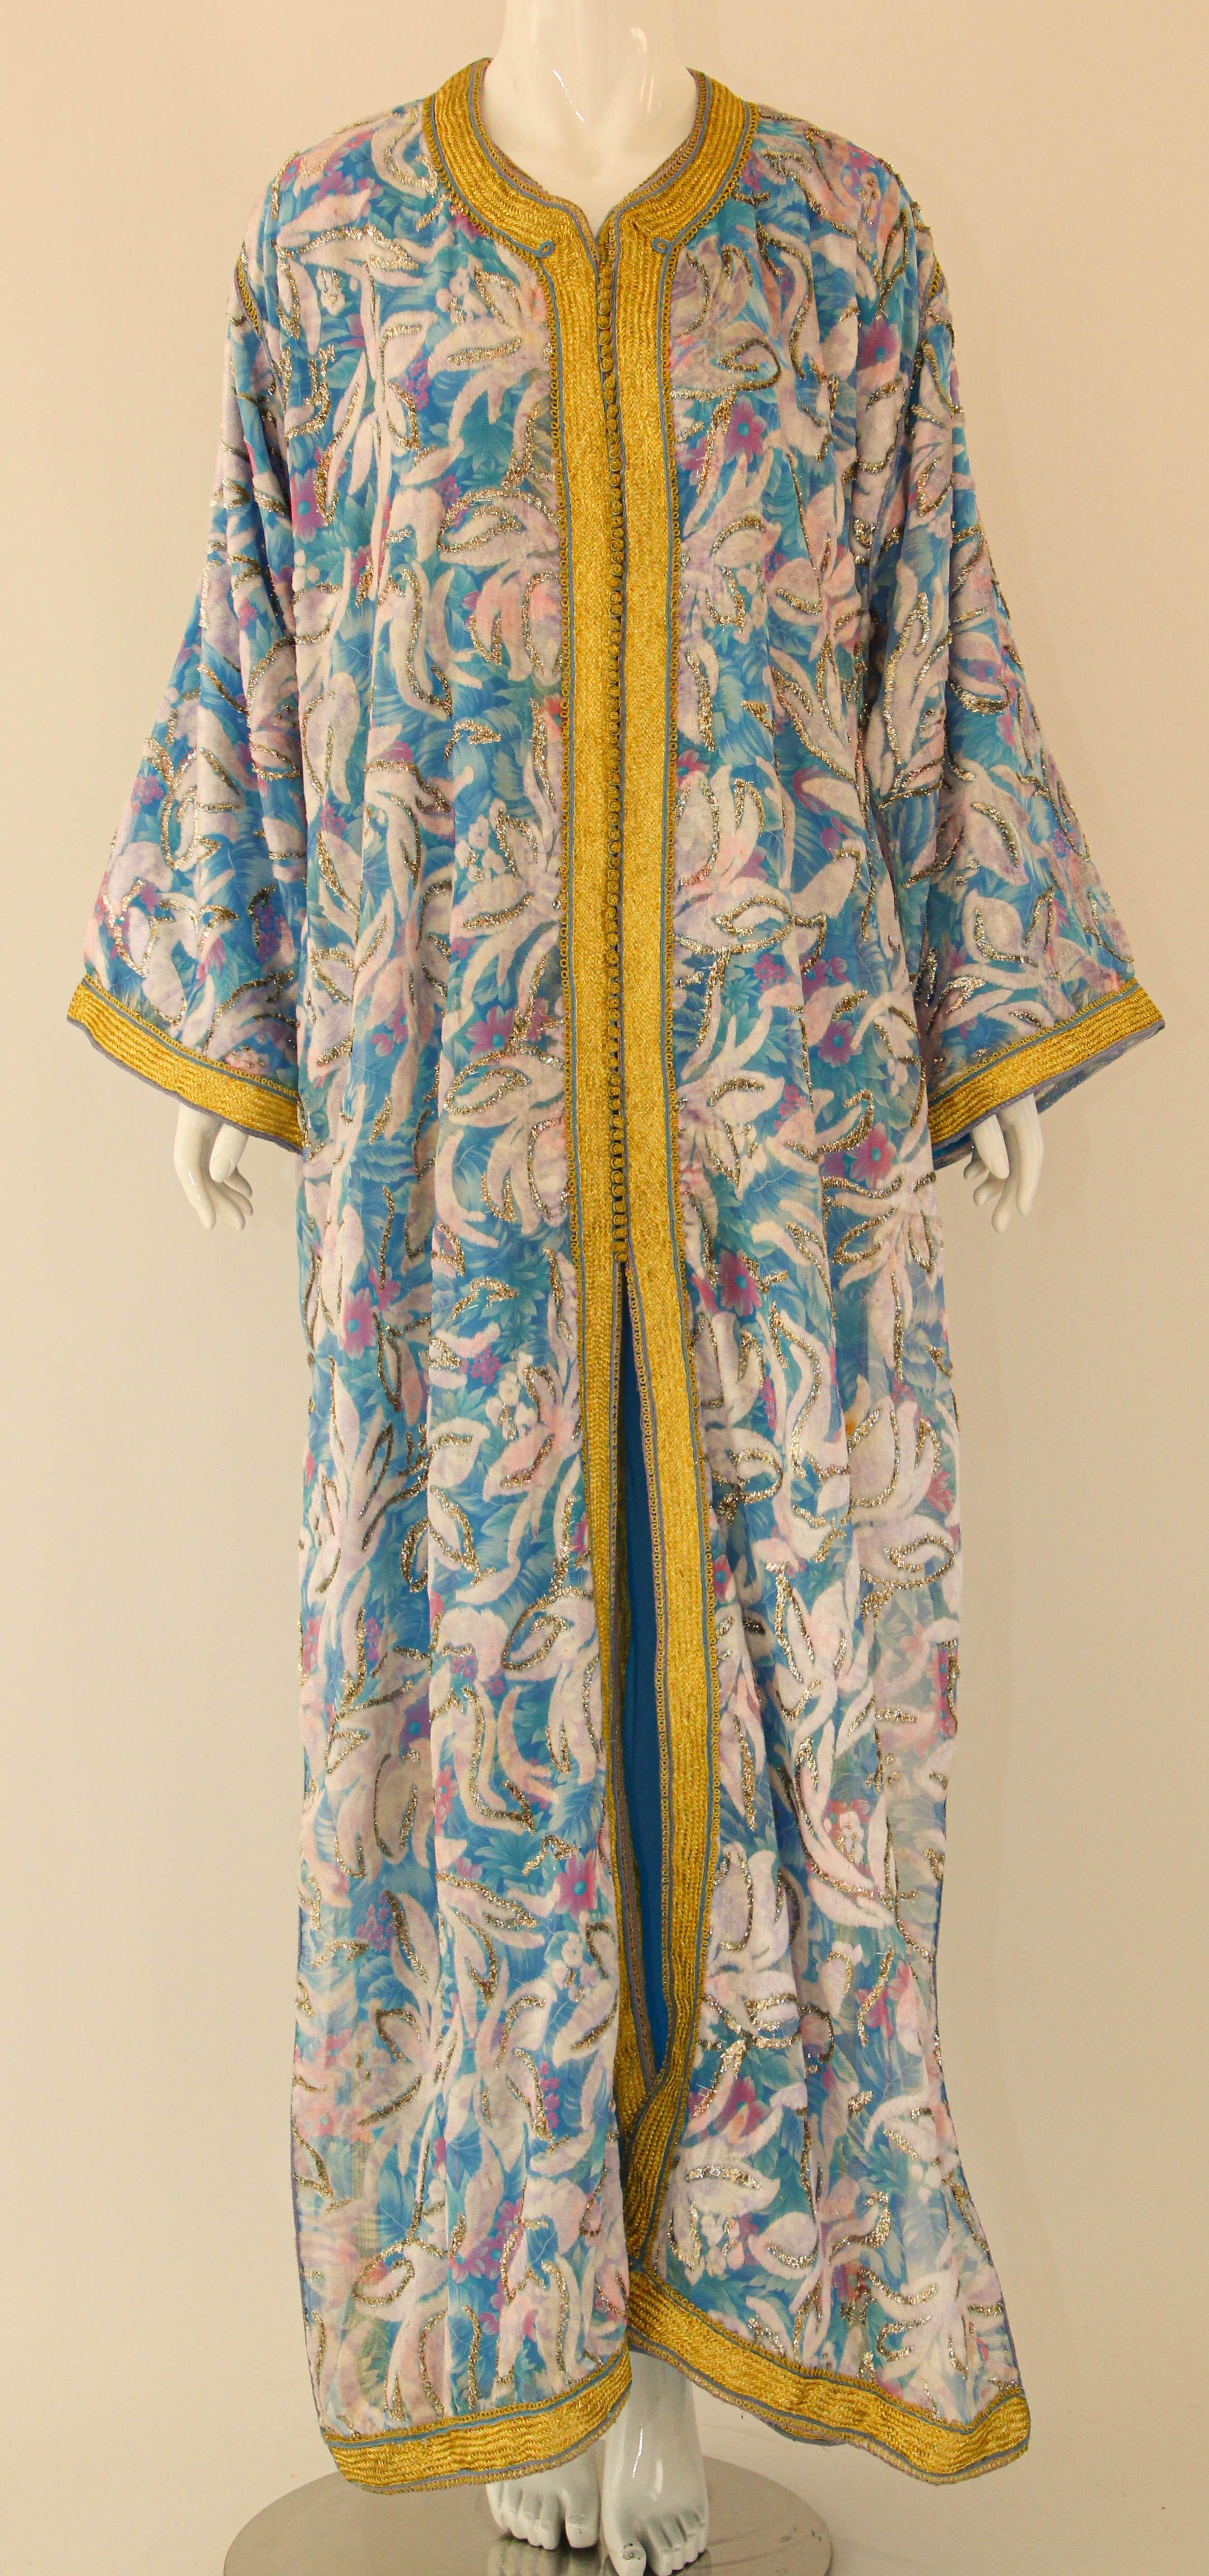 1960s Moroccan Caftan Floral Silk Vintage Turquoise and Gold Kaftan Set In Good Condition For Sale In North Hollywood, CA